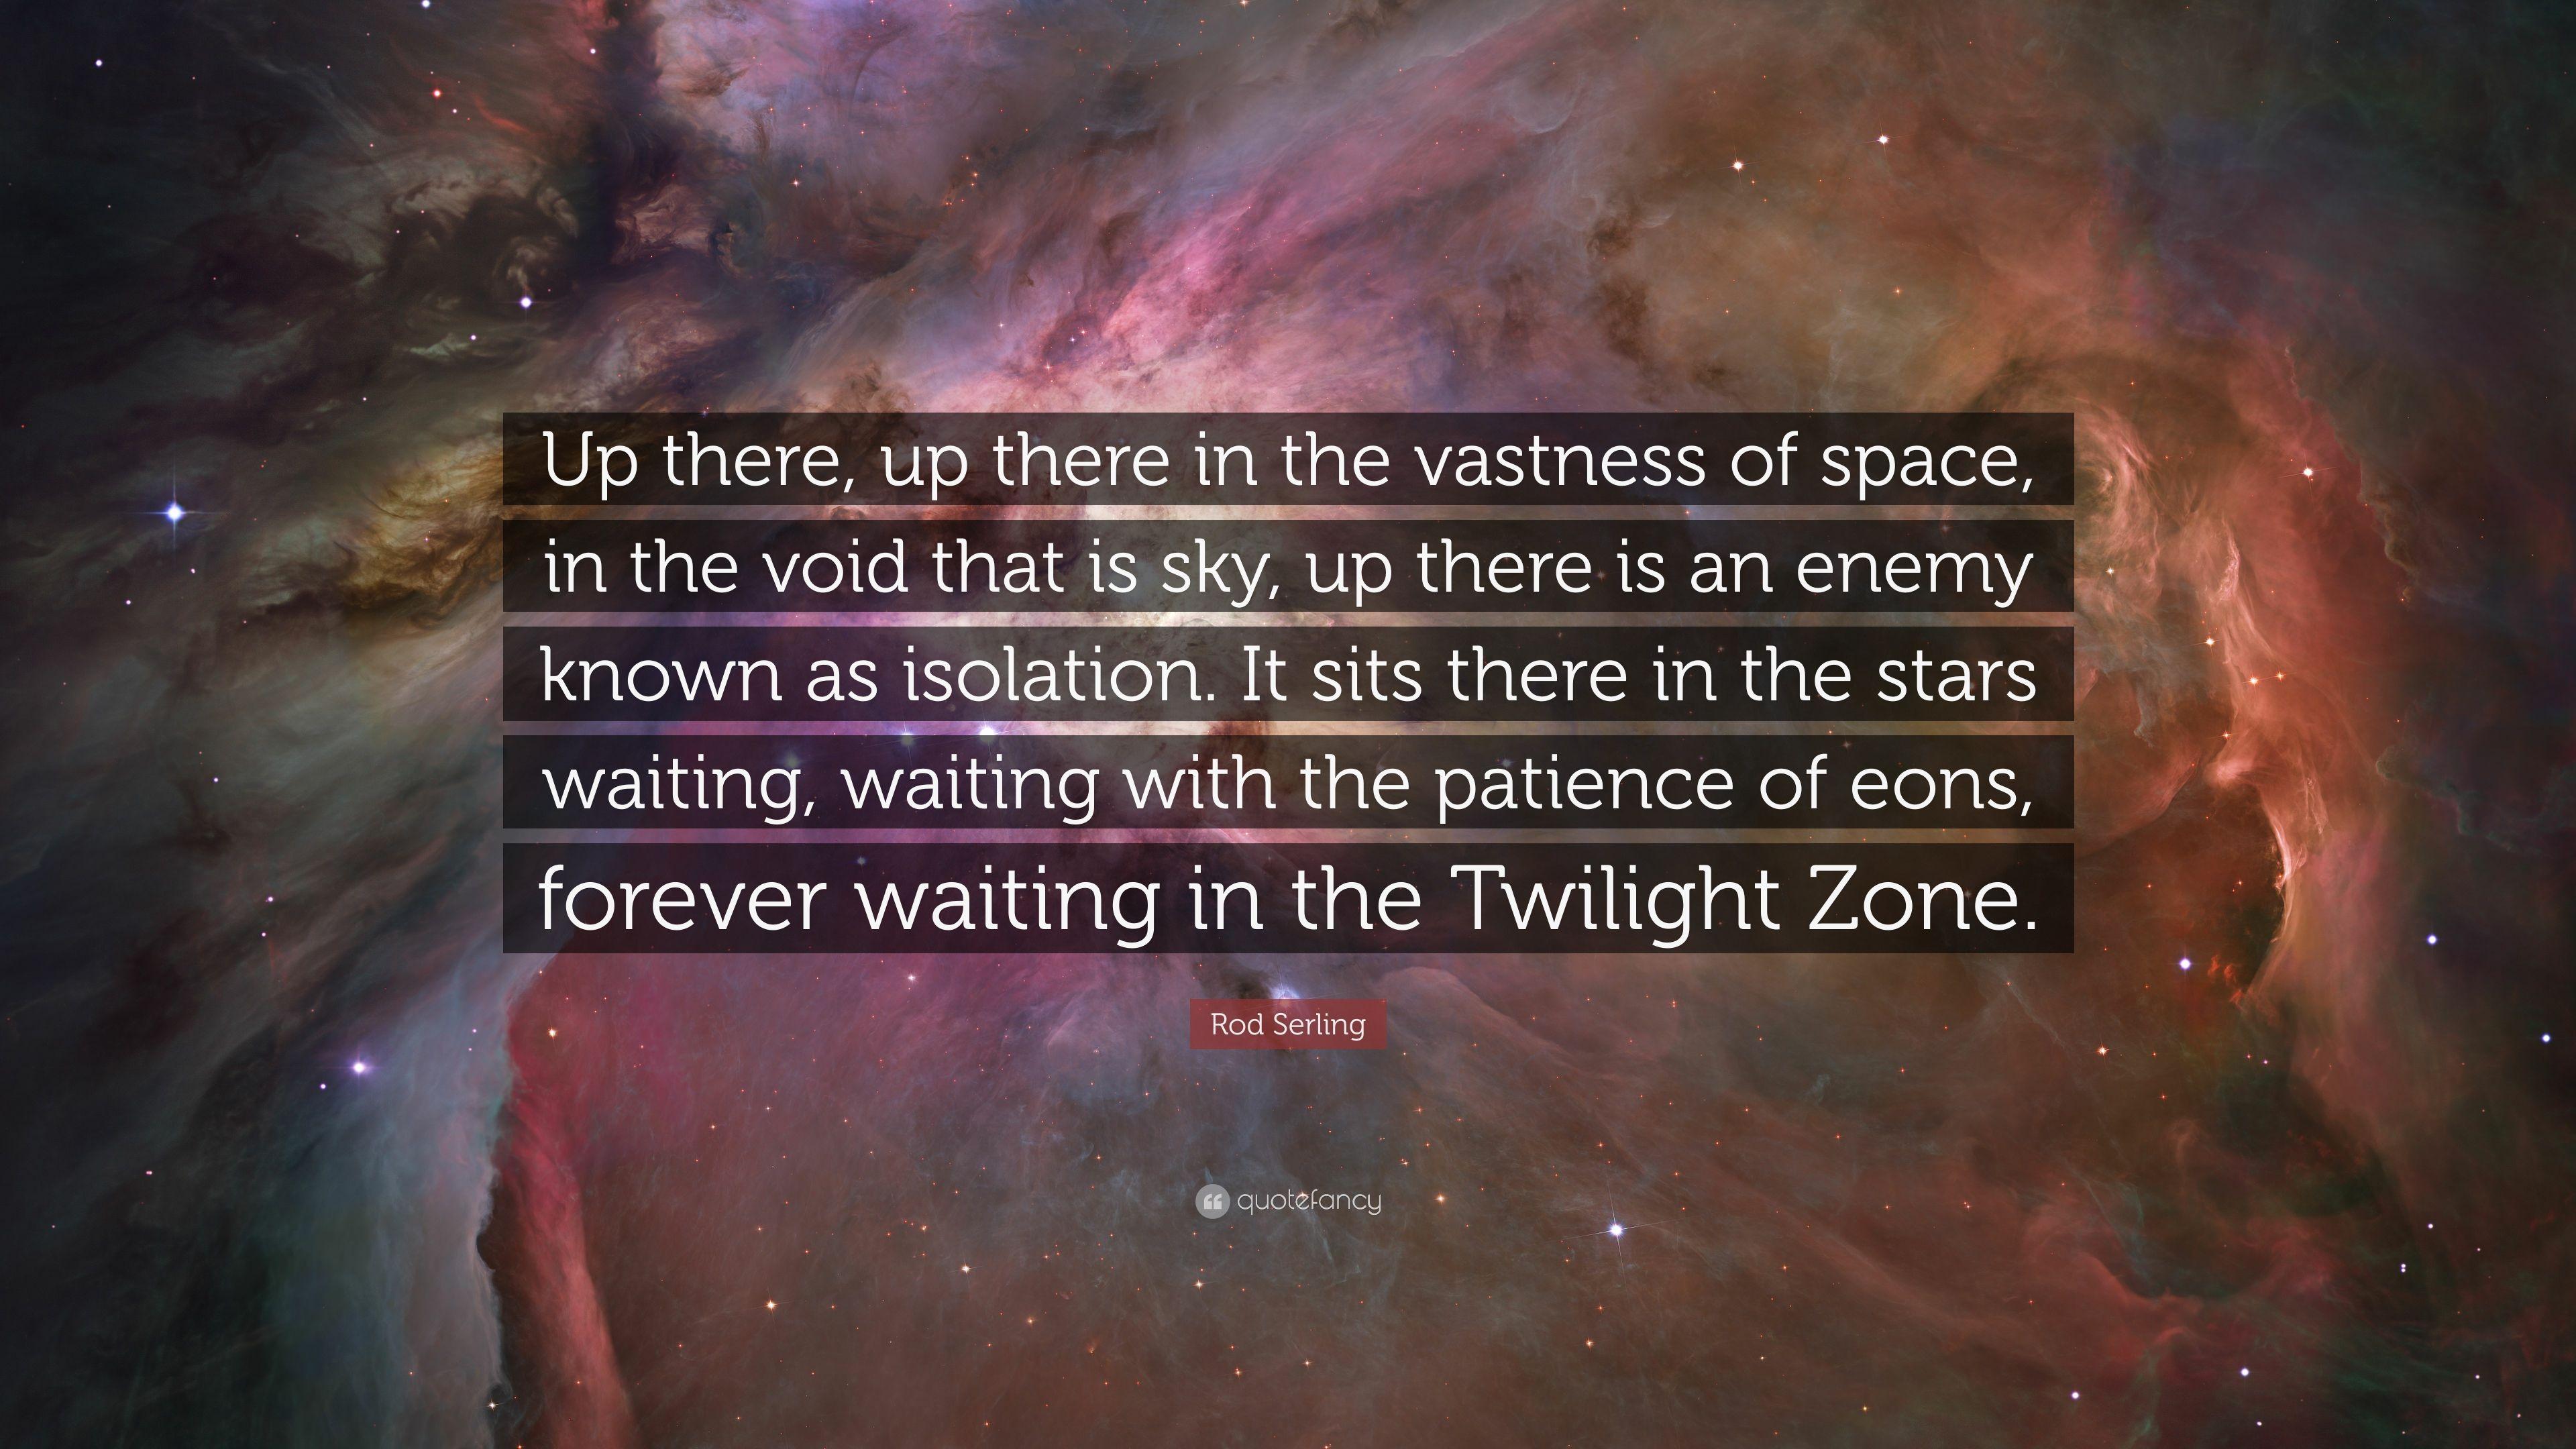 Rod Serling Quote: “Up there, up there in the vastness of space, in